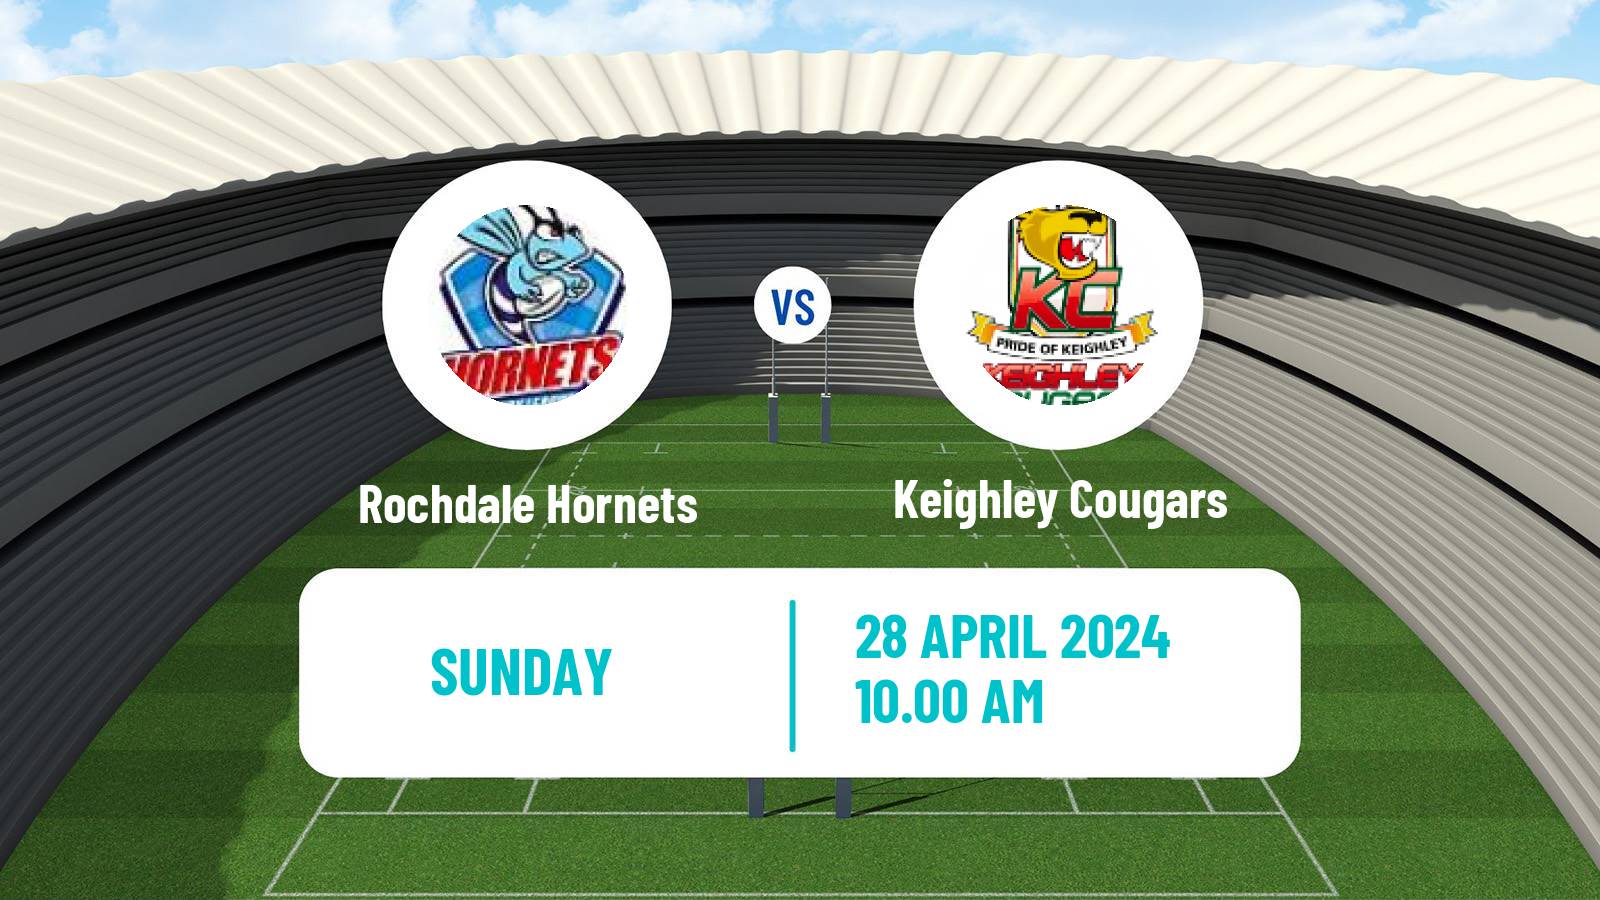 Rugby league English League 1 Rugby League Rochdale Hornets - Keighley Cougars